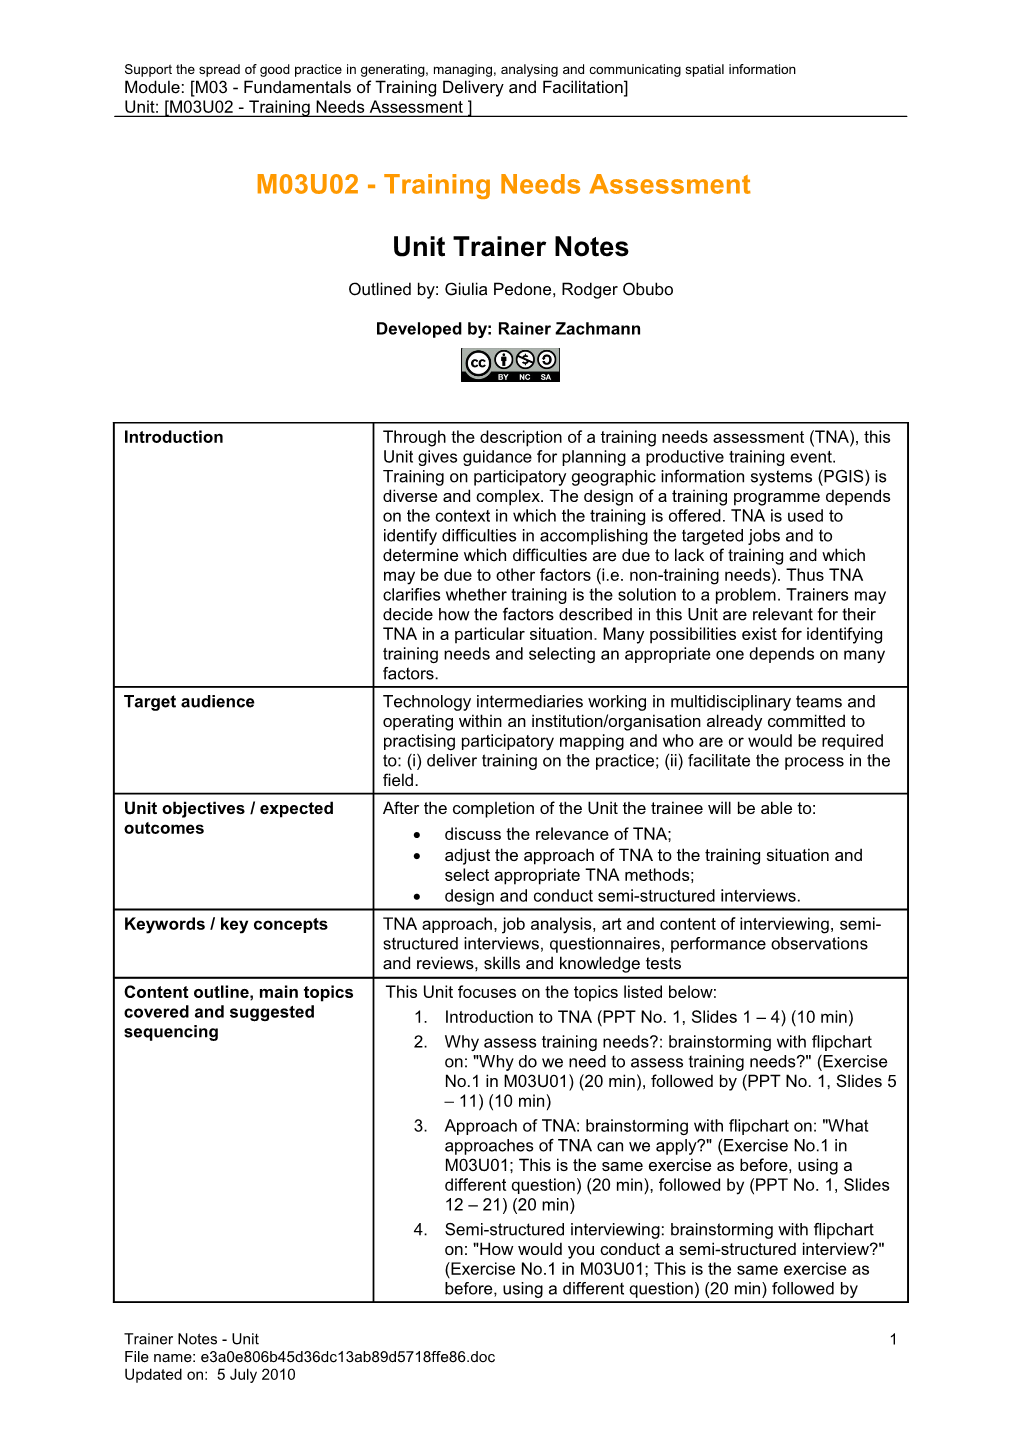 Unit Trainer Notes - Traing Needs Assessment